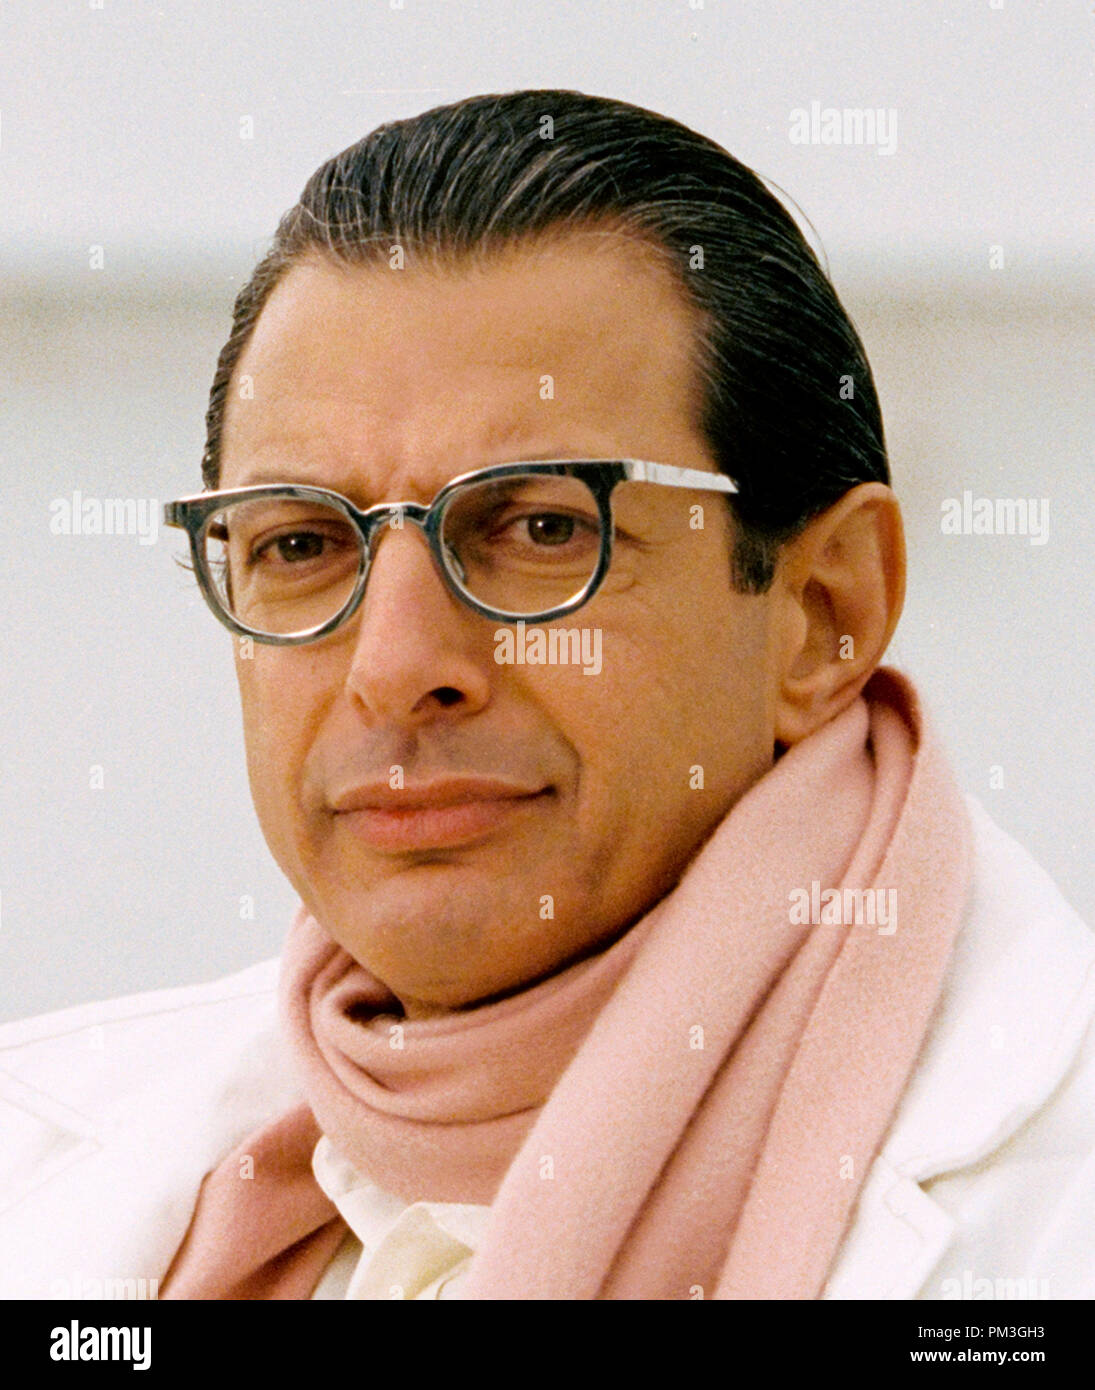 Film Still from 'The Life Aquatic with Steve Zissou' Jeff Goldblum © 2004 Touchstone Pictures File Reference # 307351145THA  For Editorial Use Only -  All Rights Reserved Stock Photo